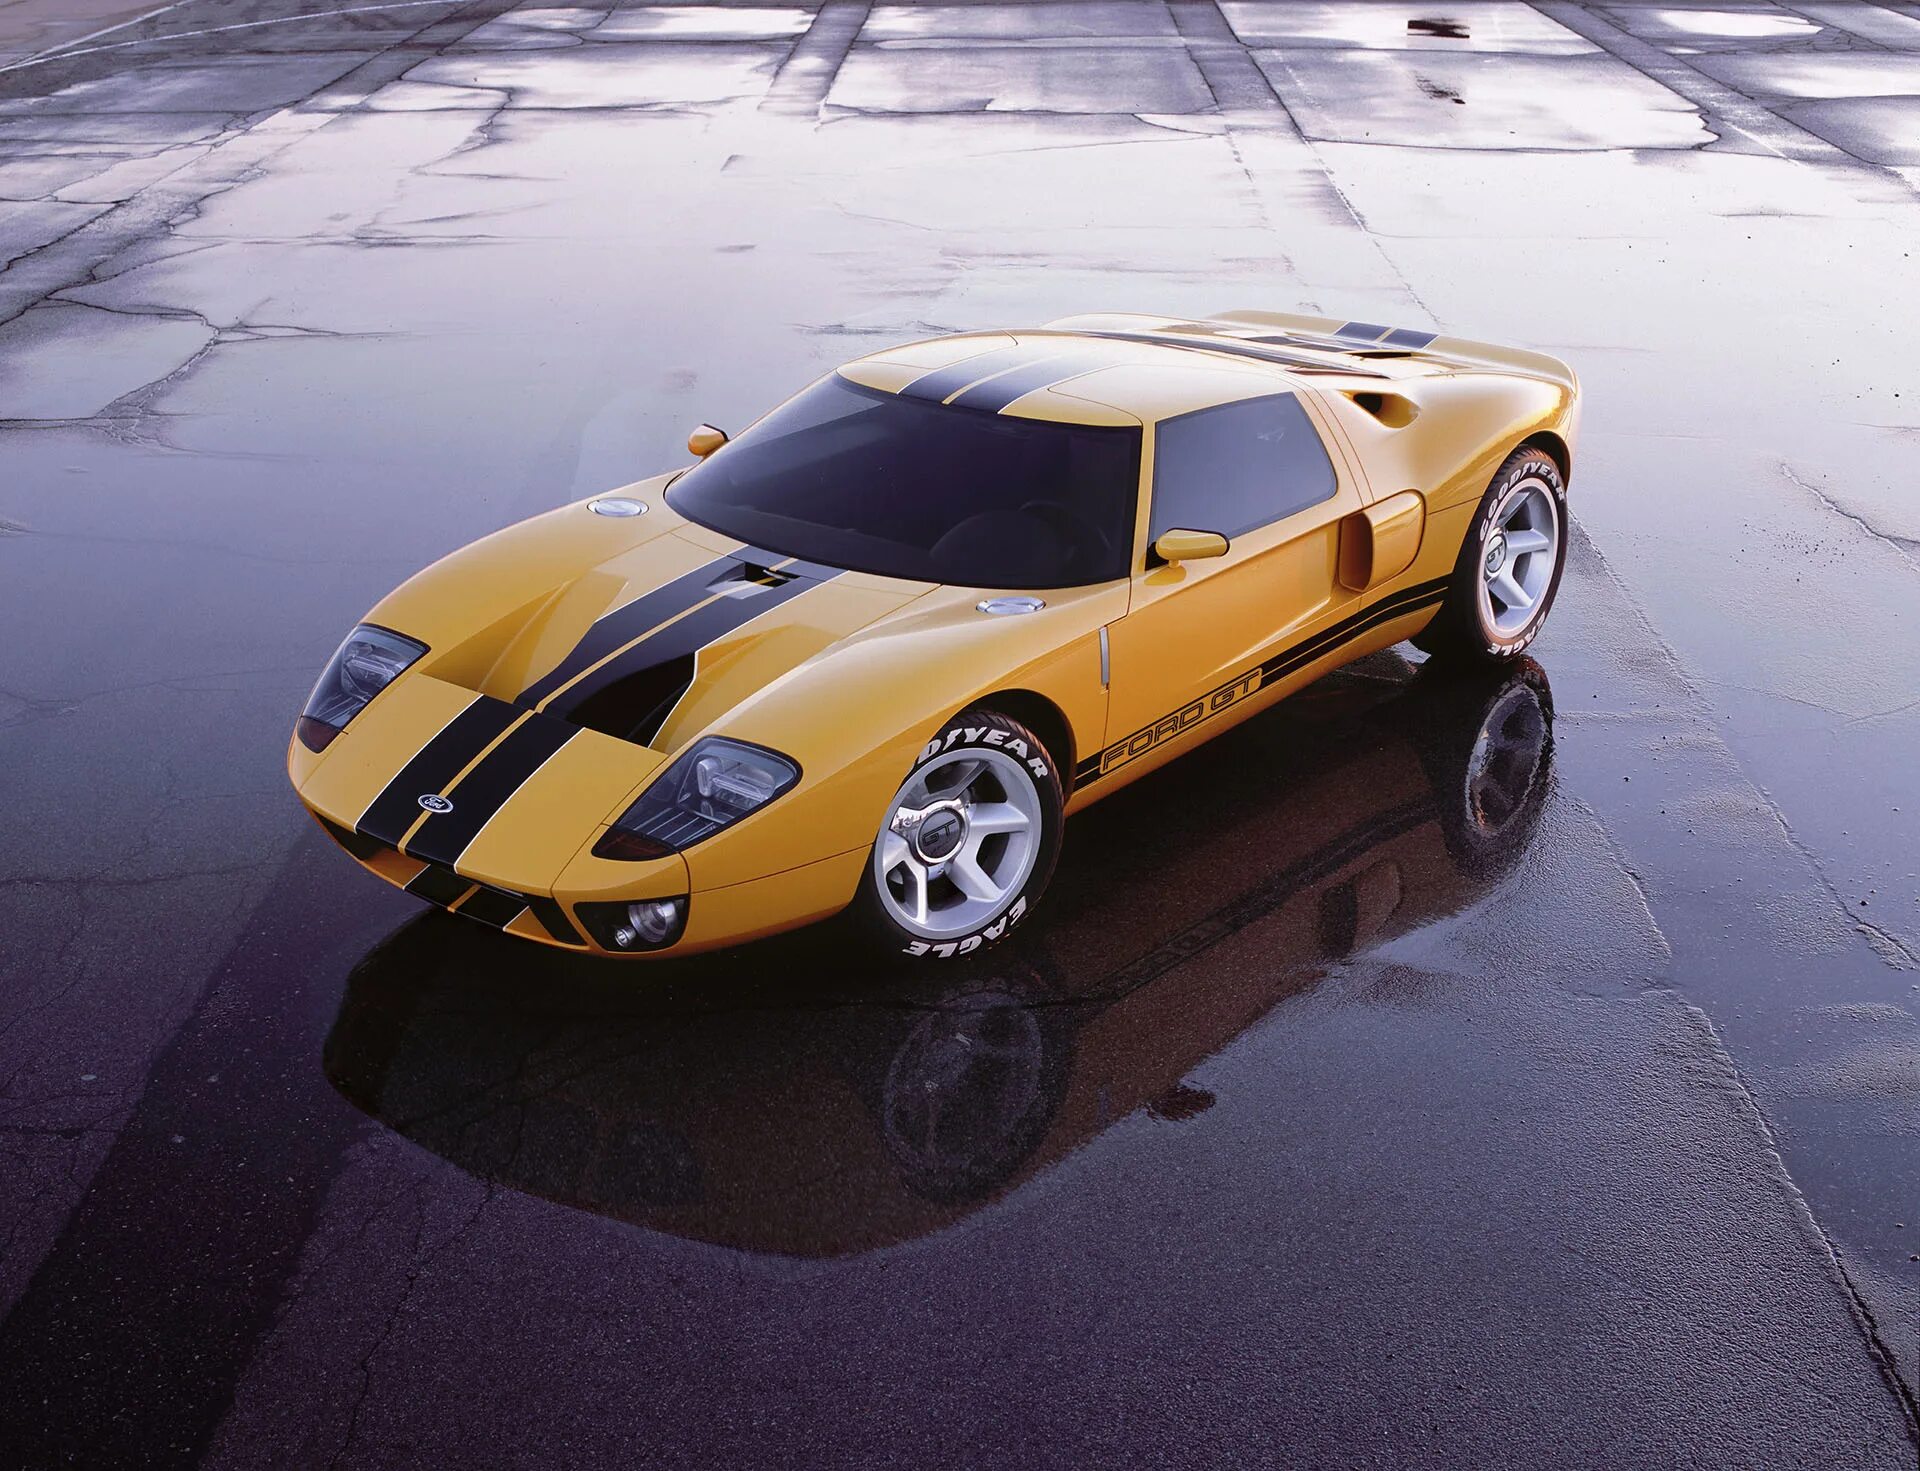 Форд gt40. Форд ГТ 40. Ford gt 2002. Ford gt40 Concept.